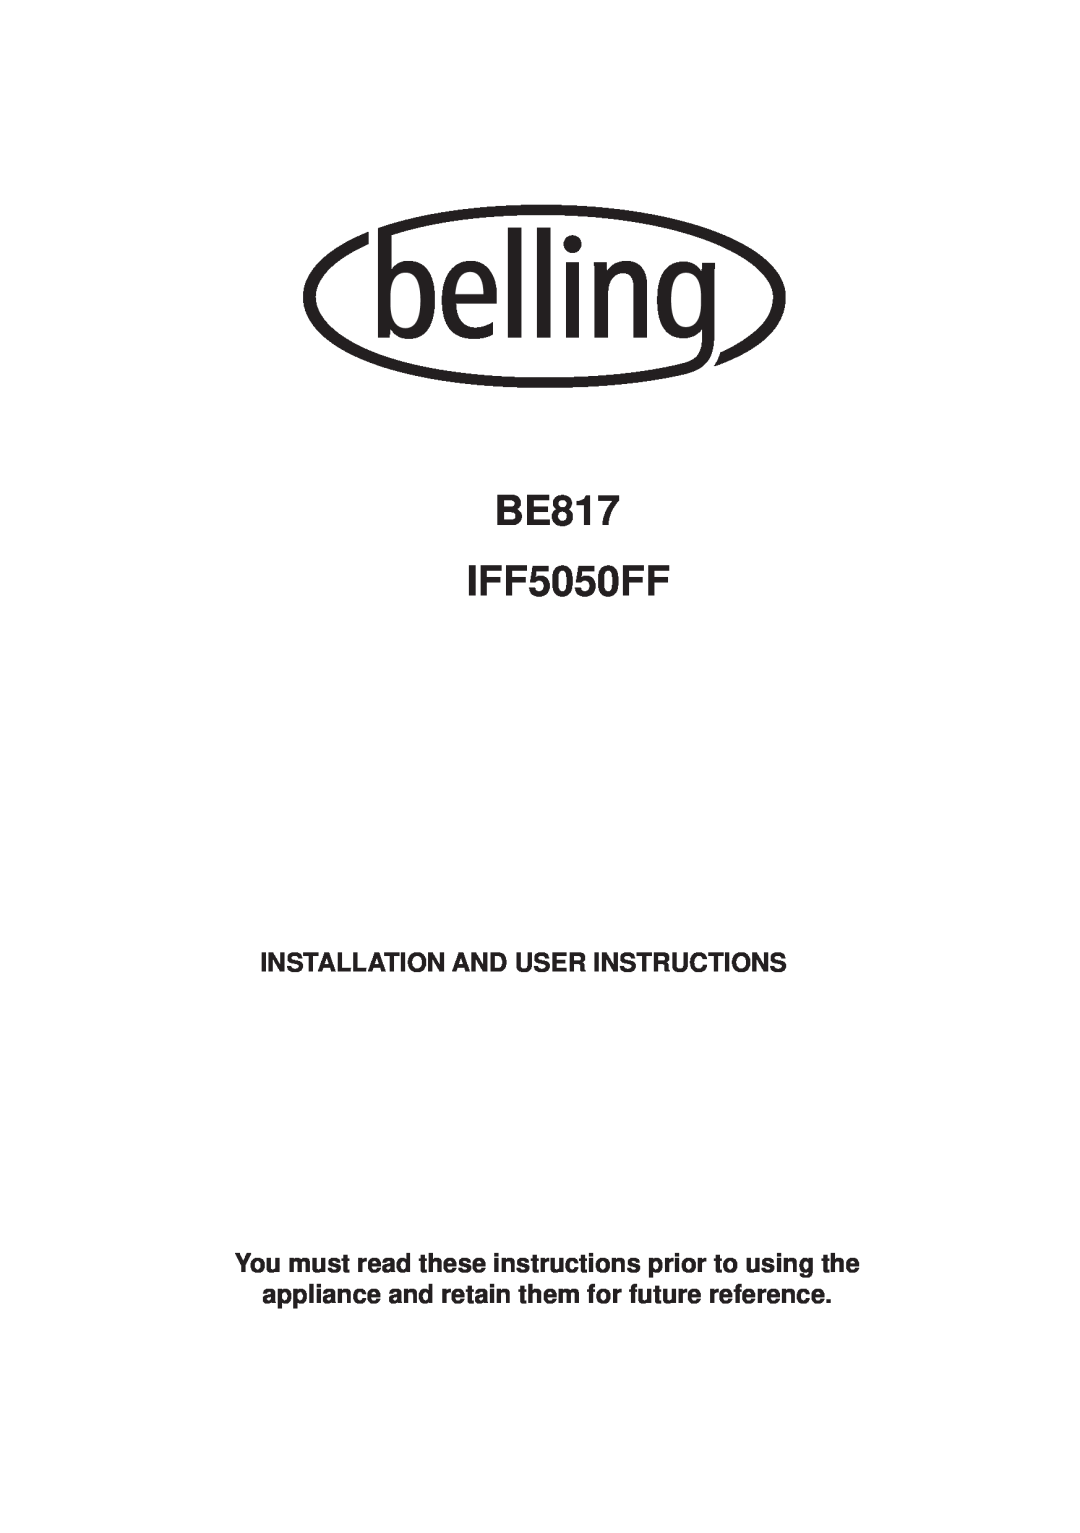 Glen Dimplex Home Appliances Ltd manual Installation And User Instructions, BE817 IFF5050FF 